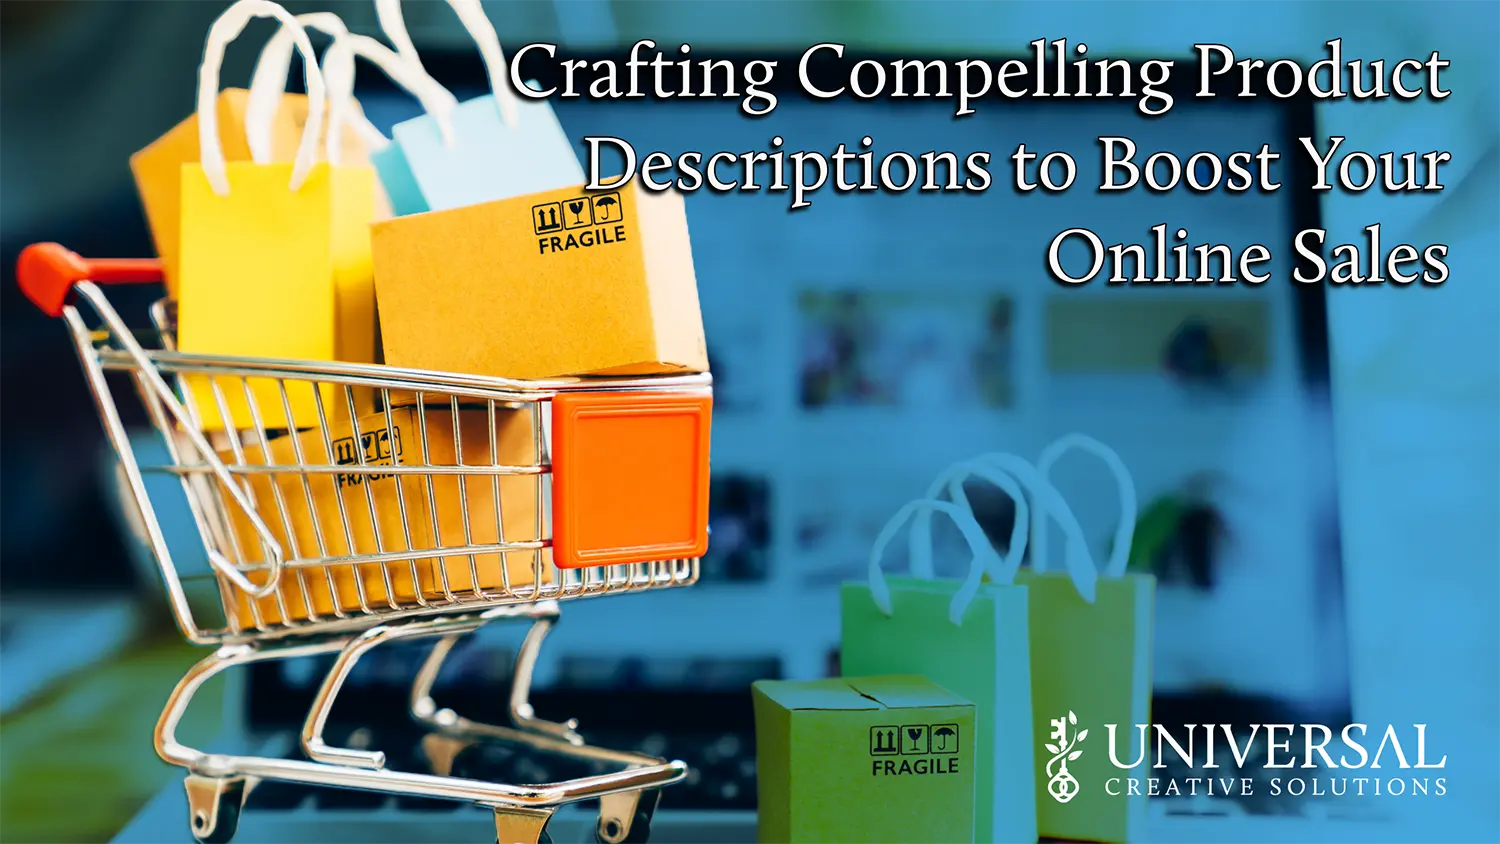 Crafting Compelling Product Descriptions to Boost Your Online Sales